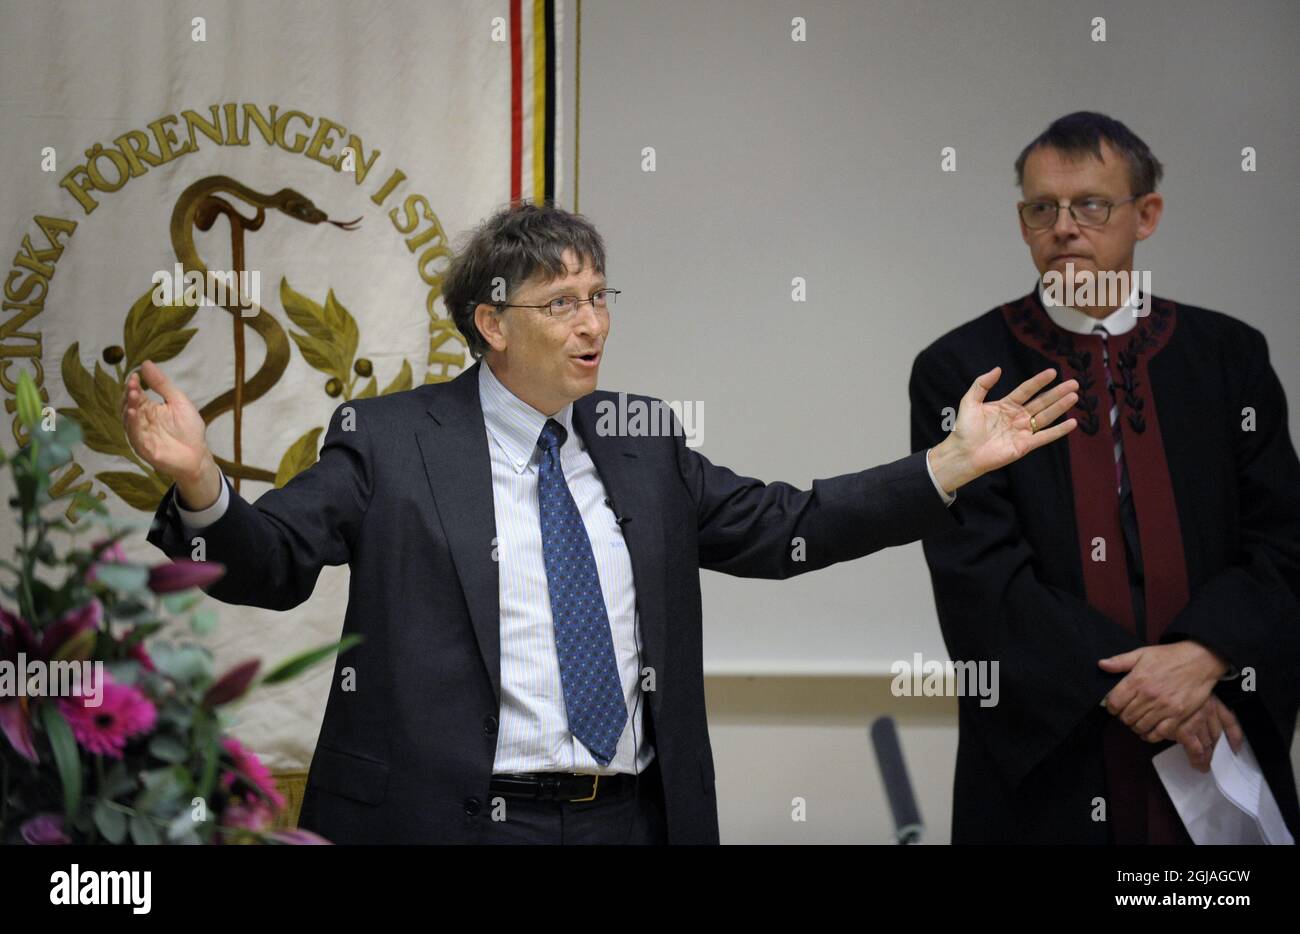 ** Swedish Professor Hans Rosling is dead at 68 ** STOCKHOLM 2008-01-23 Bill Gates (L) and Professor of International Health Hans Rosling during Gates speech. Bill Gates was awarded a honorary doctorate in medicine at the Karolinska Institutet in Stockholm, Sweden, January 23, 2008. Bill and Melinda Gates (not present during the conferment ceremony) for their work with the global health issues through the Bill and Melinda Gates Foundation. Karolinska Institutet is one of the leading medical universities in the world and nominate the winner of the Nobel prize in physiology or medicine. Photo: A Stock Photo